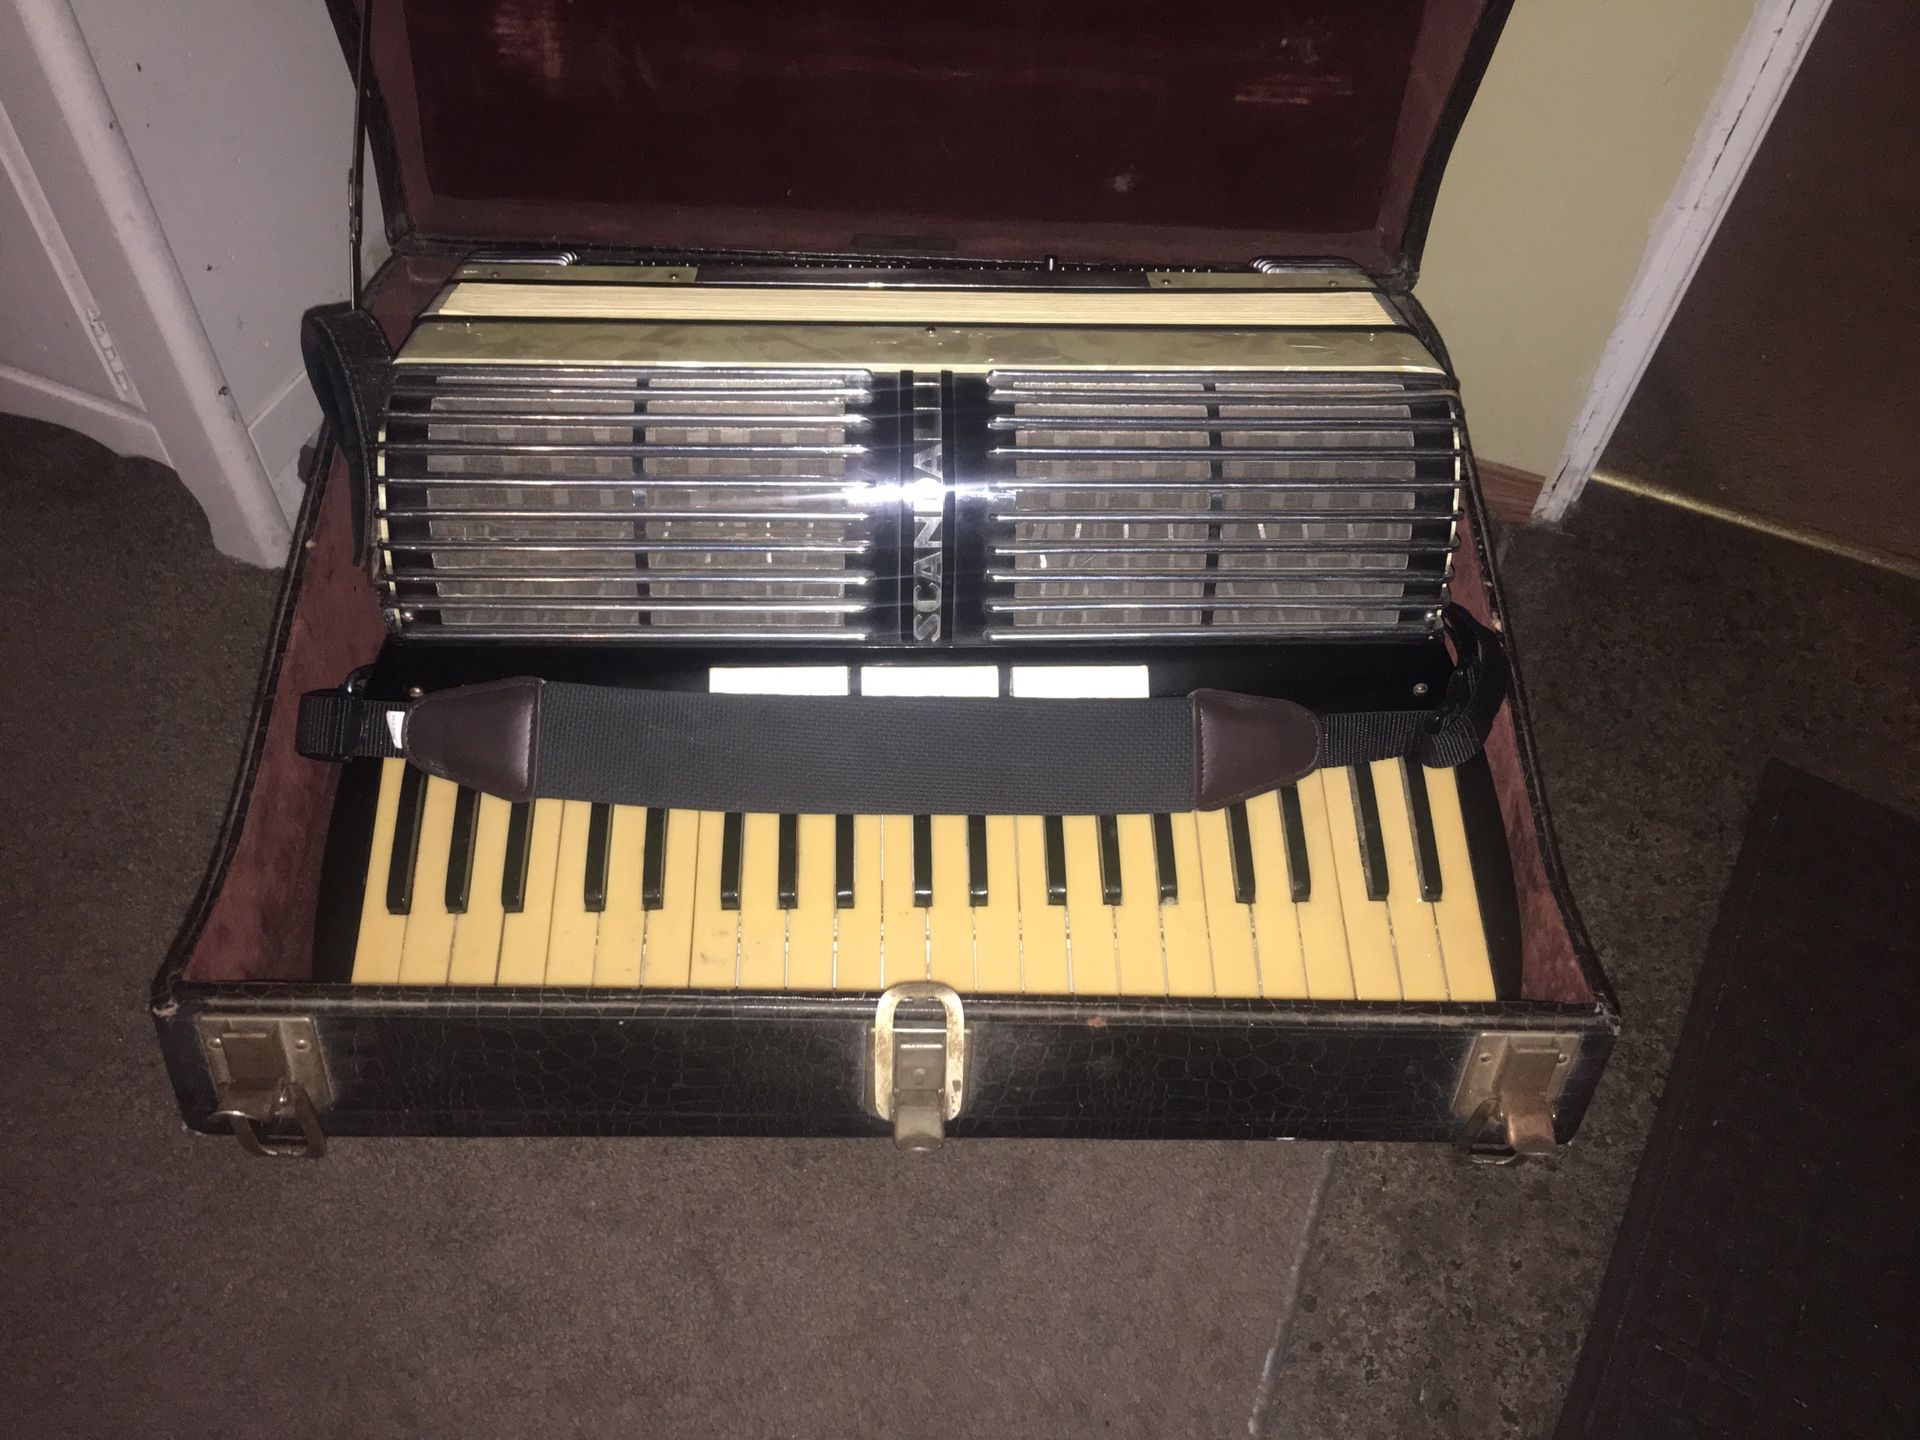 Awesome Sounding Accordion